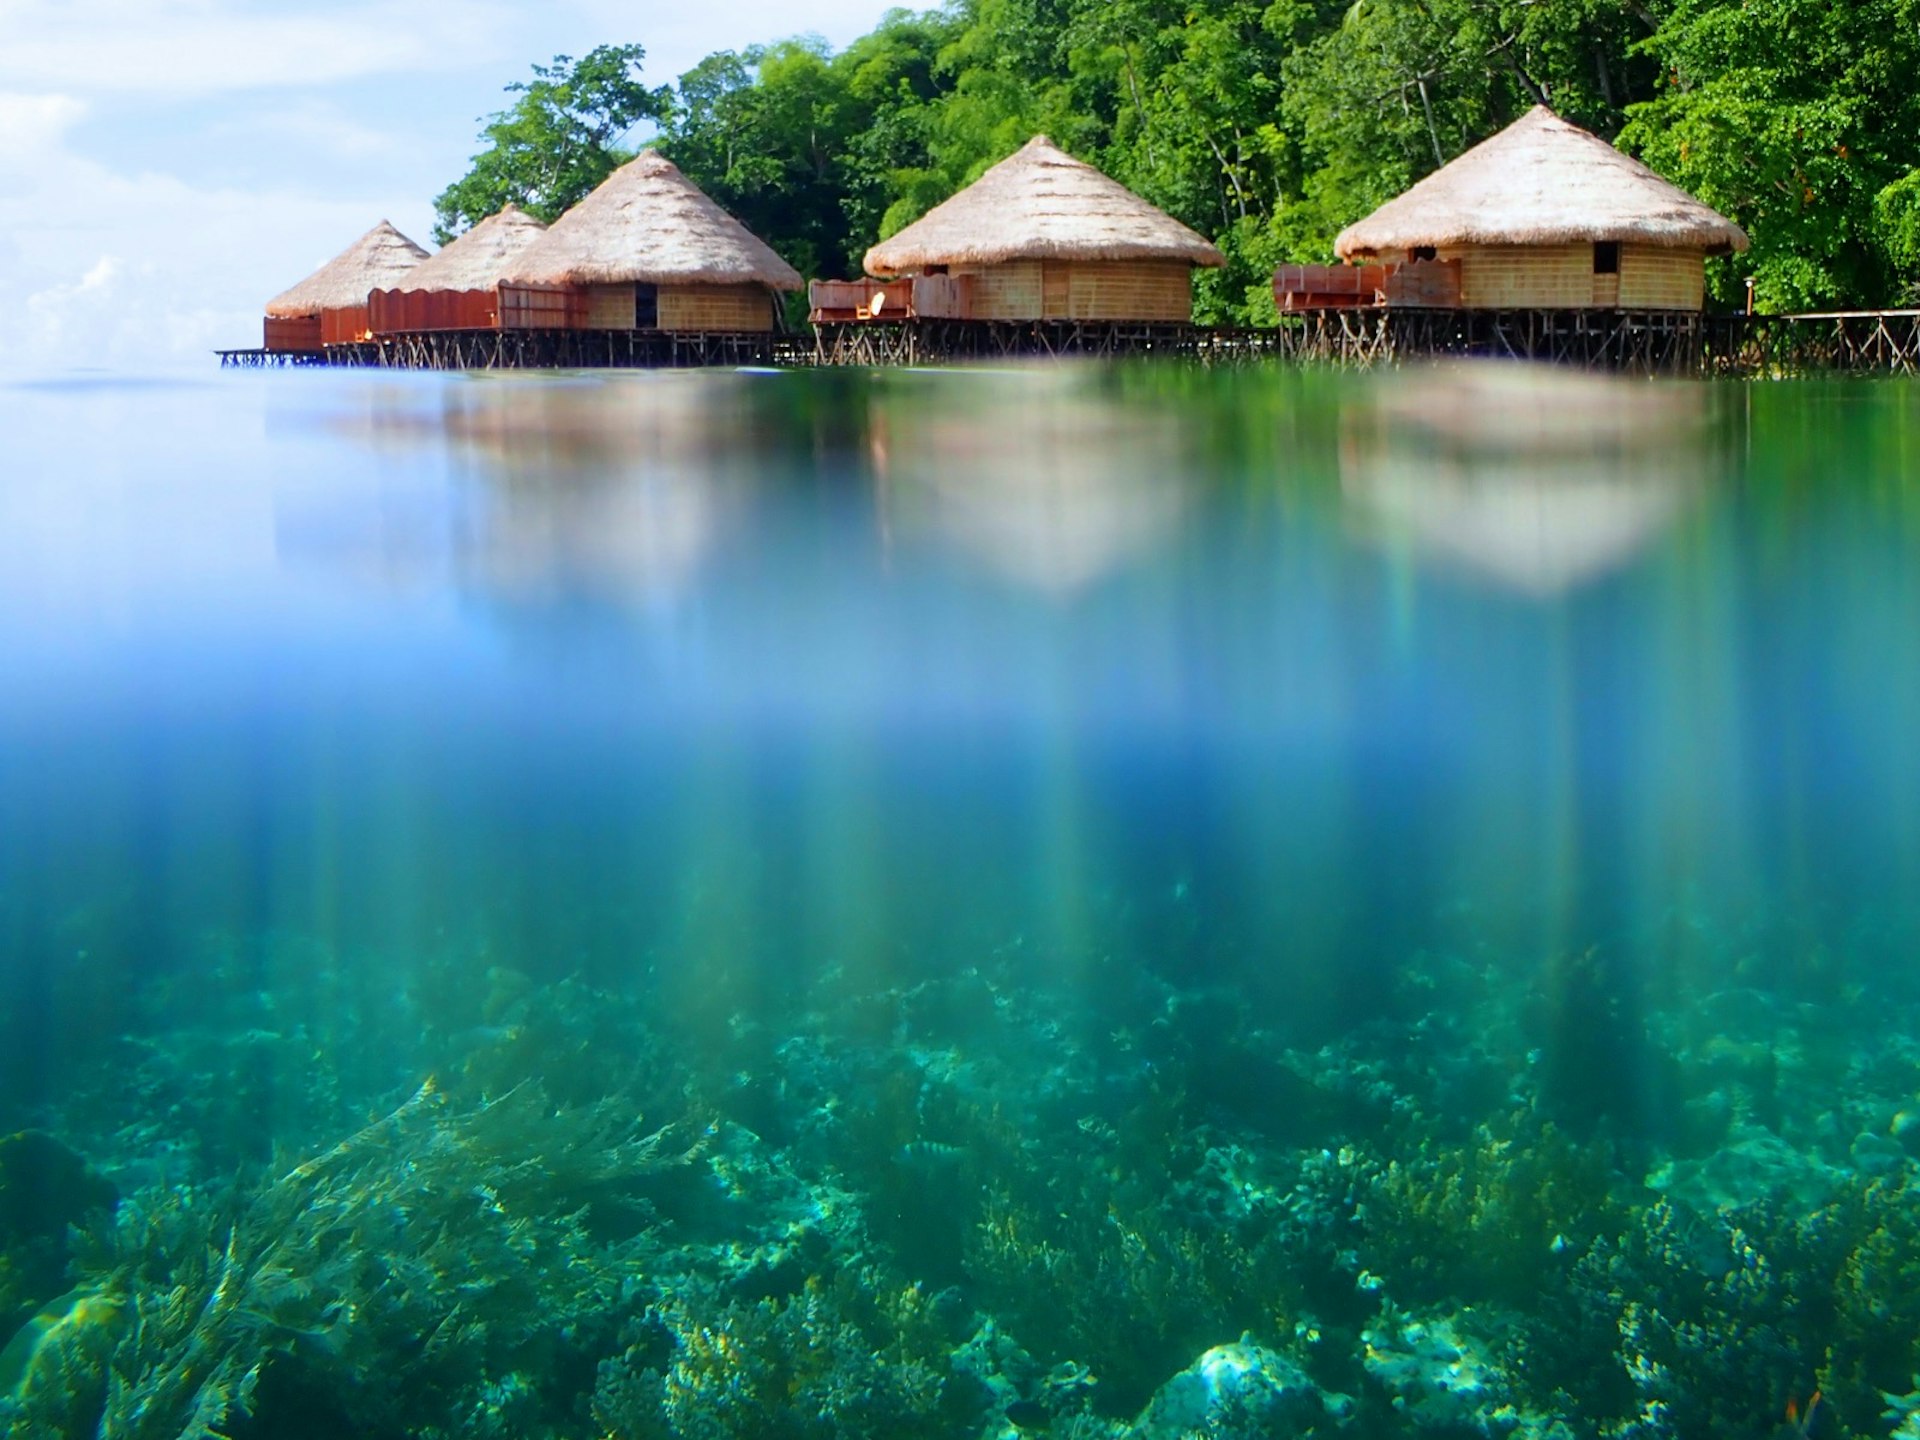 A row of thatched-roof wooden structures line the edge of the ocean. Beneath the water you can see coral; eco luxury resorts